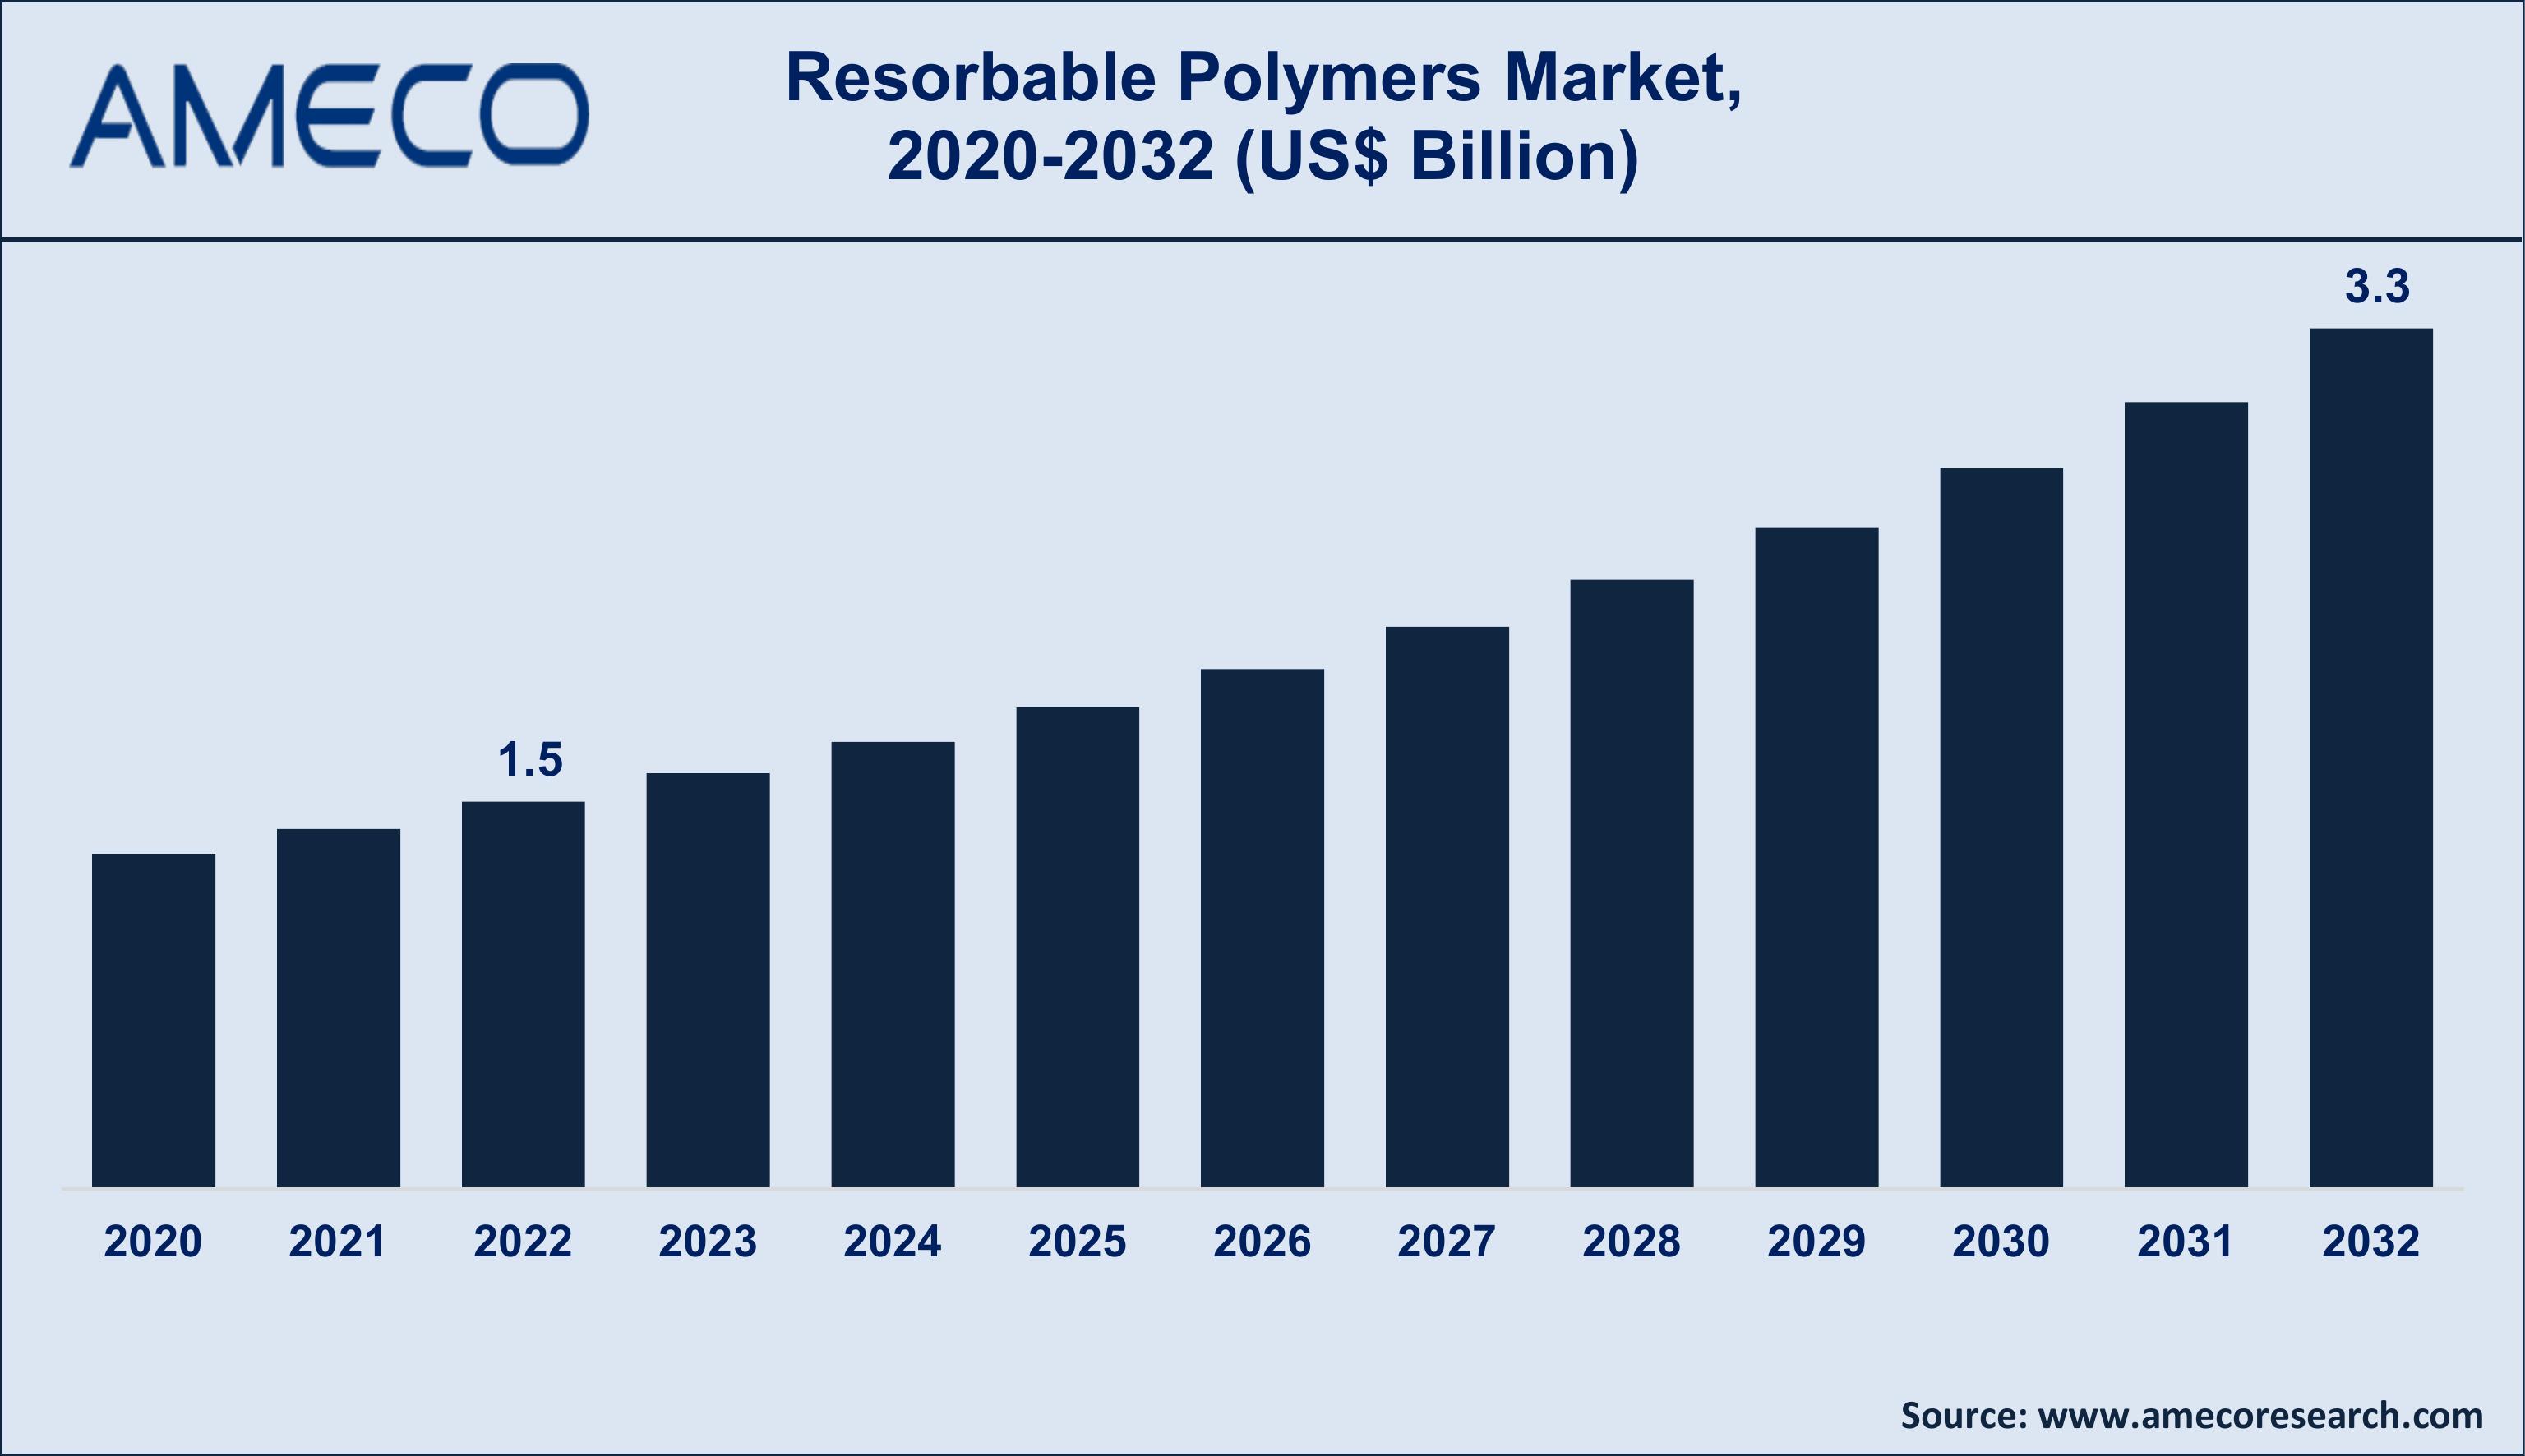  Resorbable Polymers Market Size 